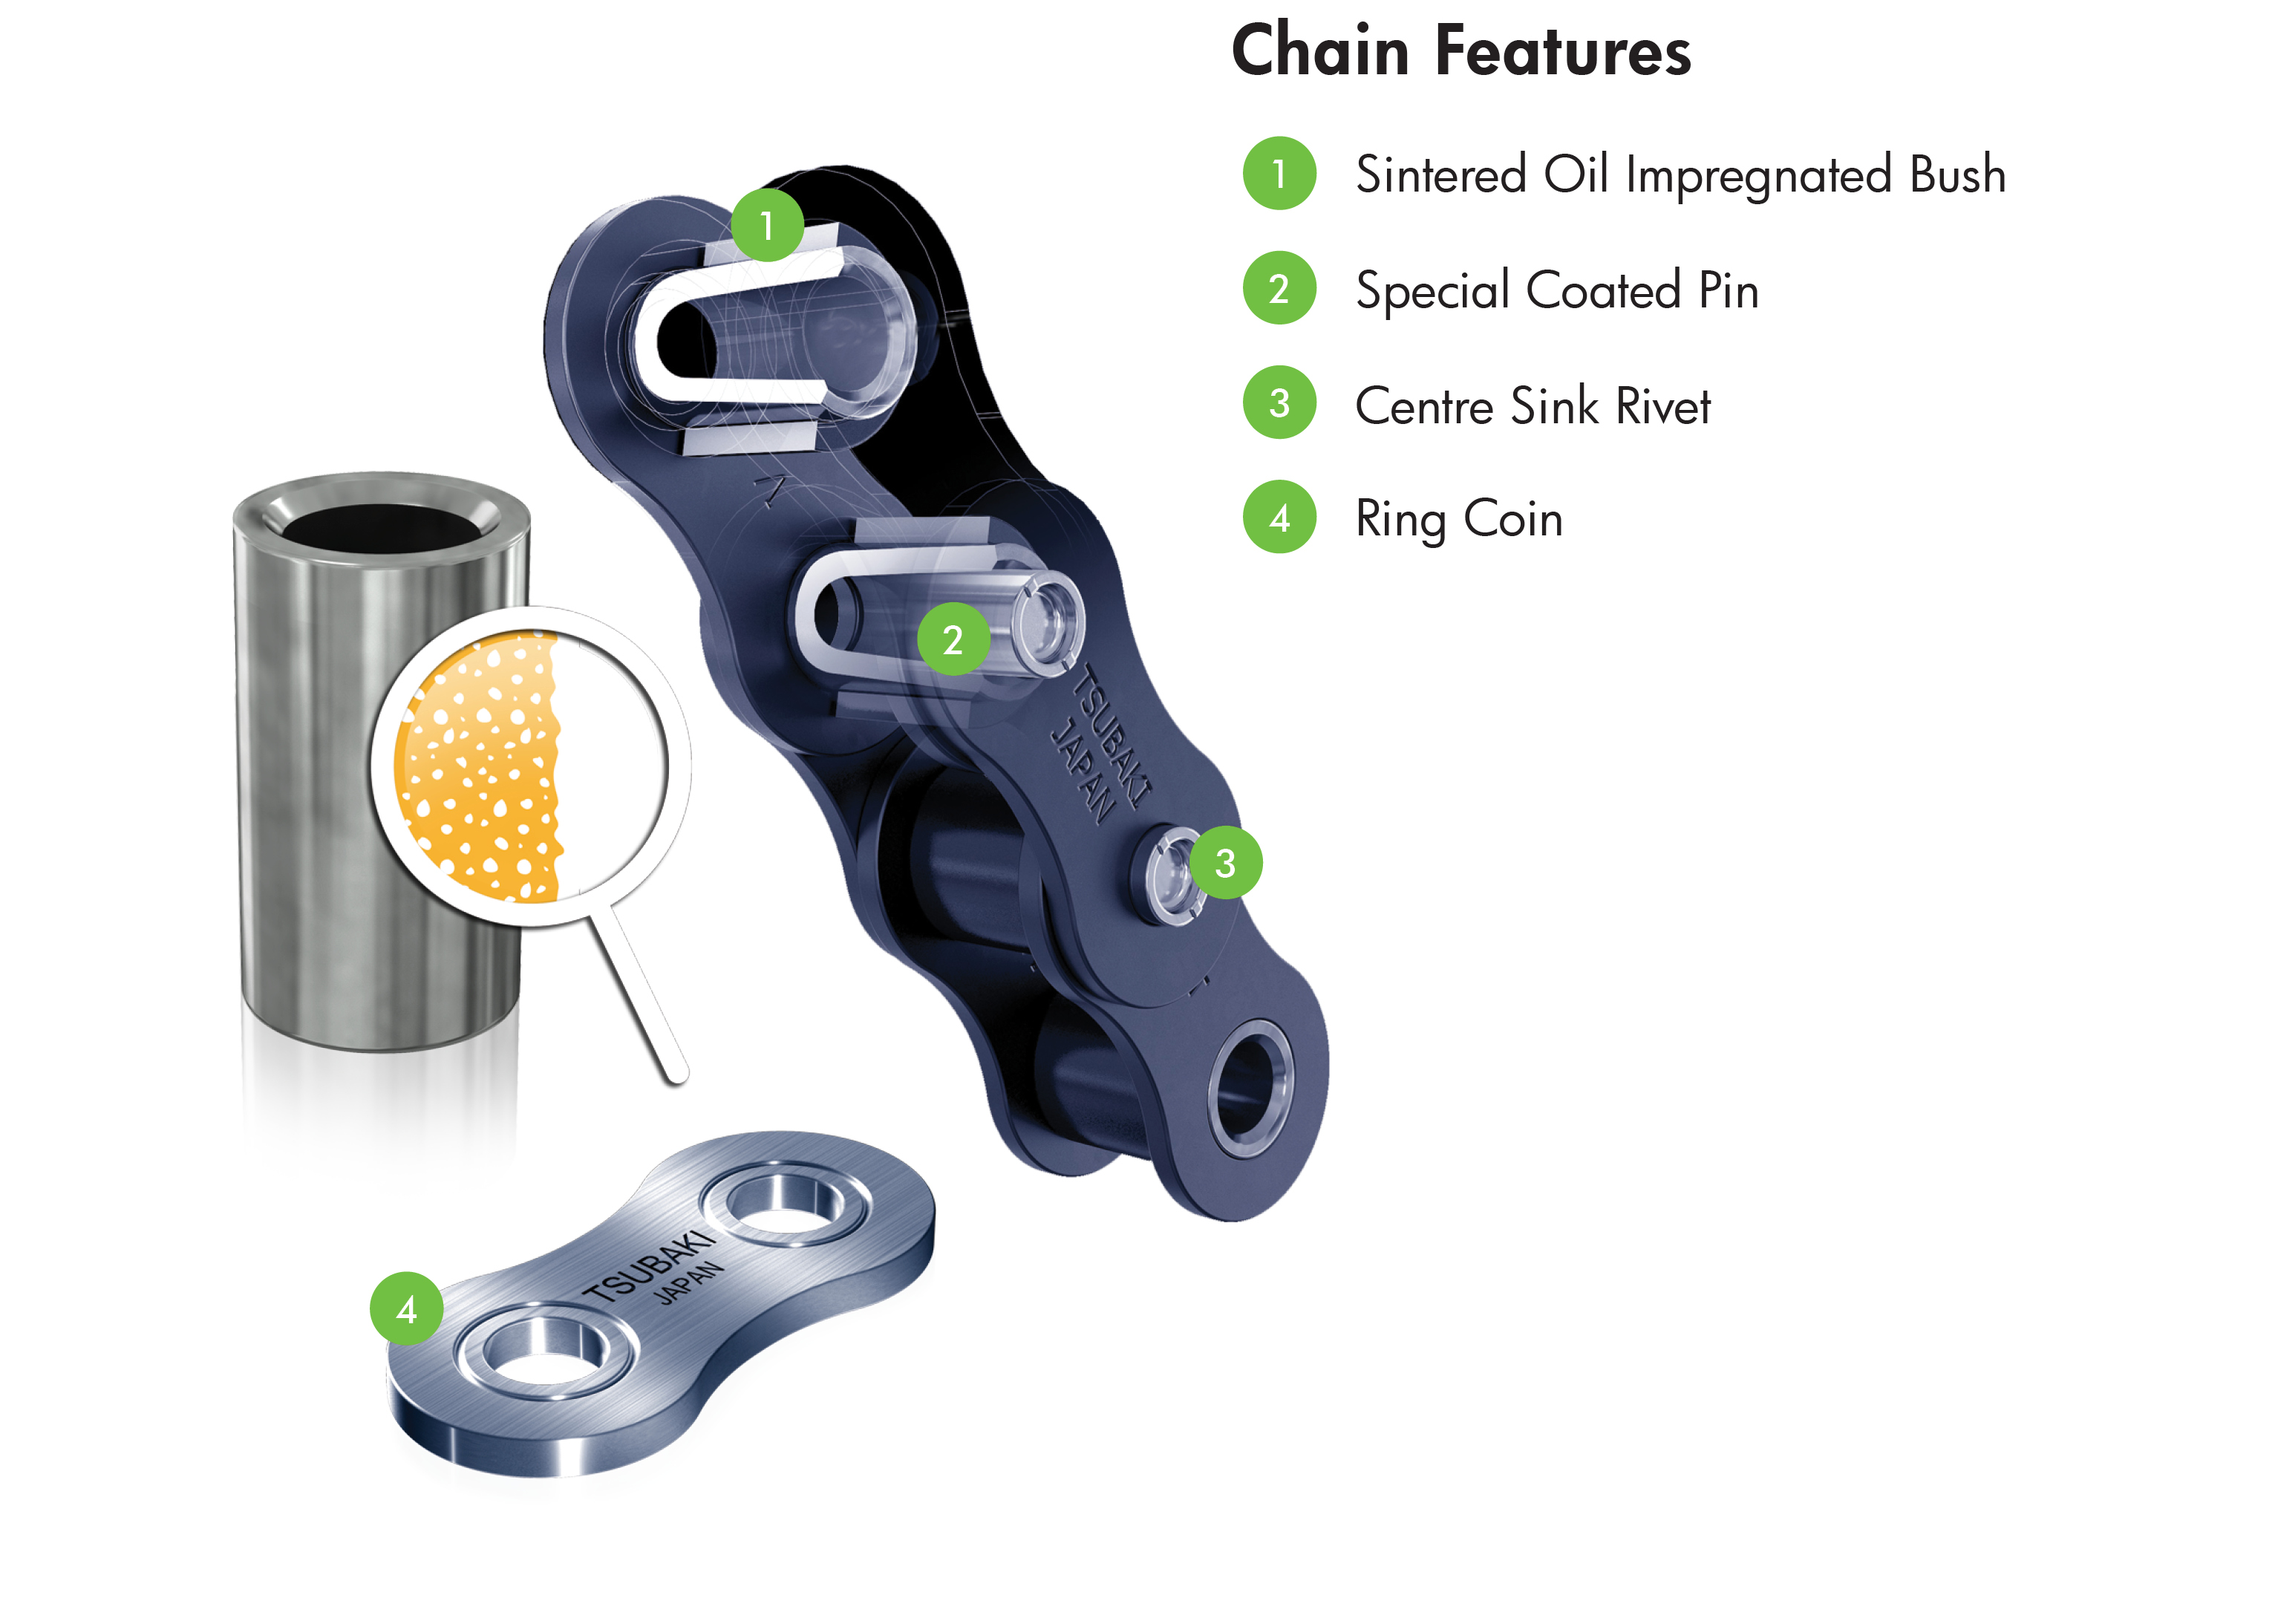 Tsubaki’s Lambda lube-free chain ensures long-term use with sintered bushes, impregnated with food-grade lubricant, combined with a special coated pin enhancing internal lubrication.